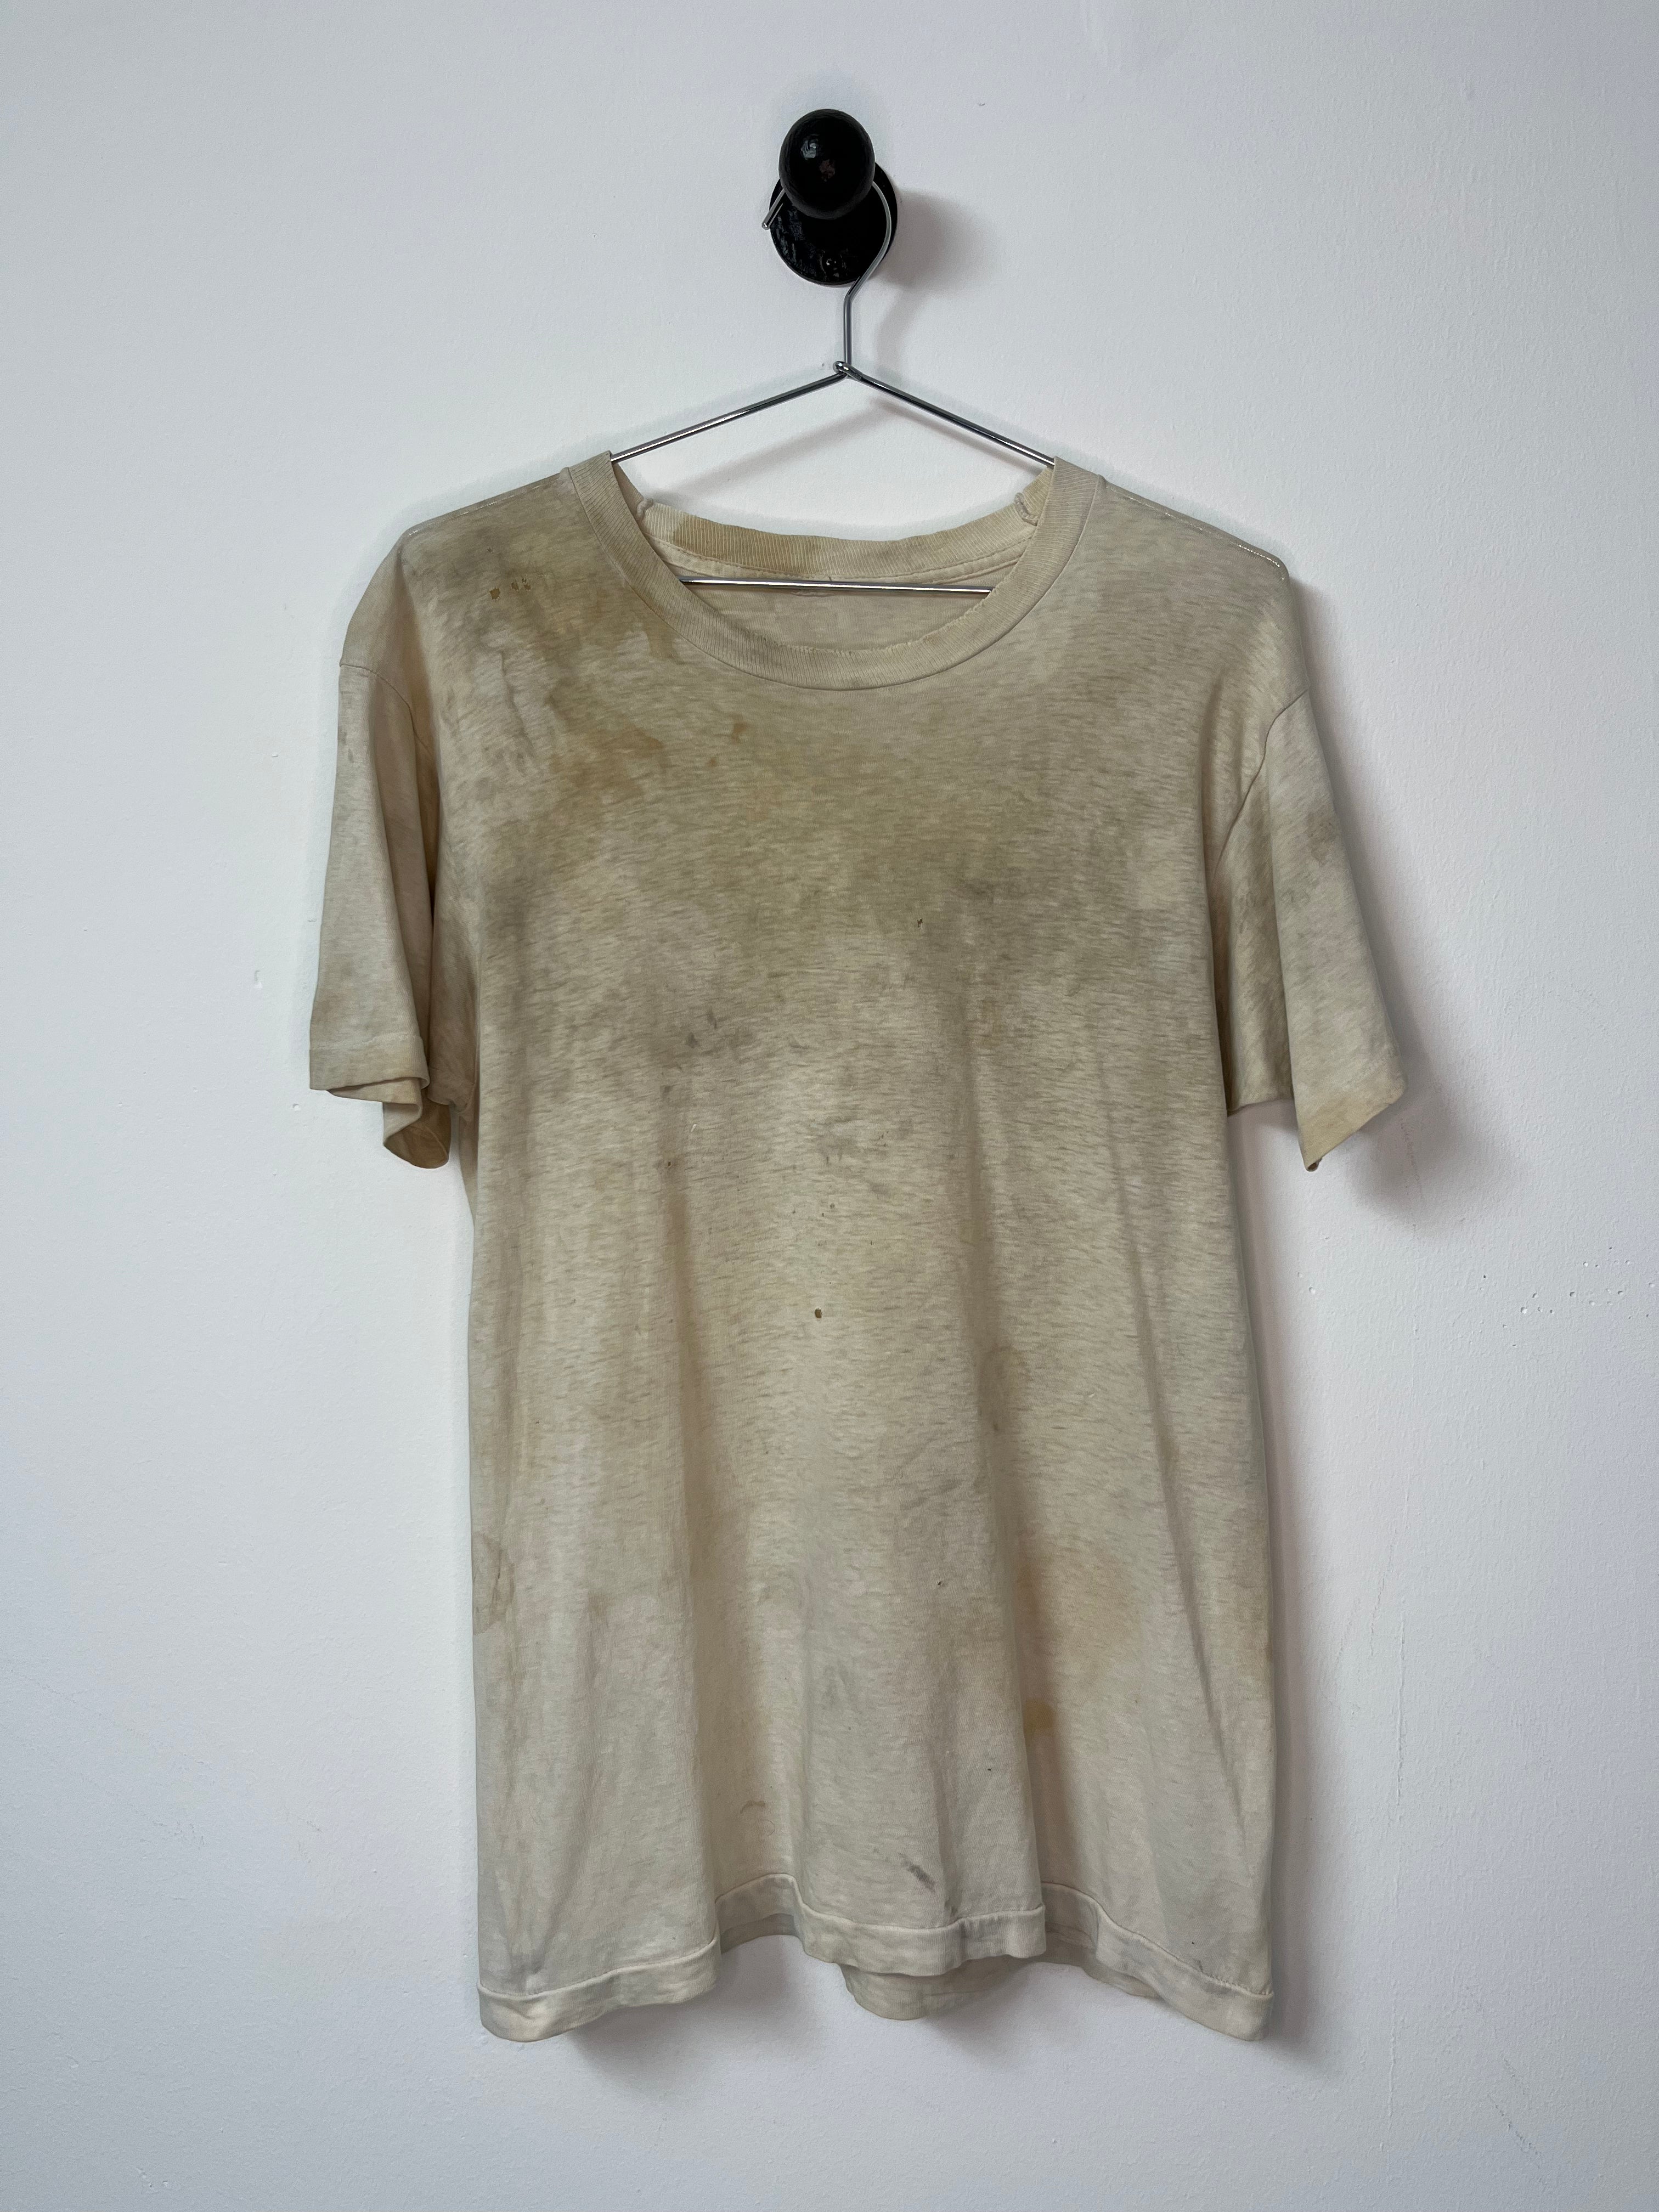 1970s Distressed T-Shirt with Discoloration- Dirty/Aged White - L/XL